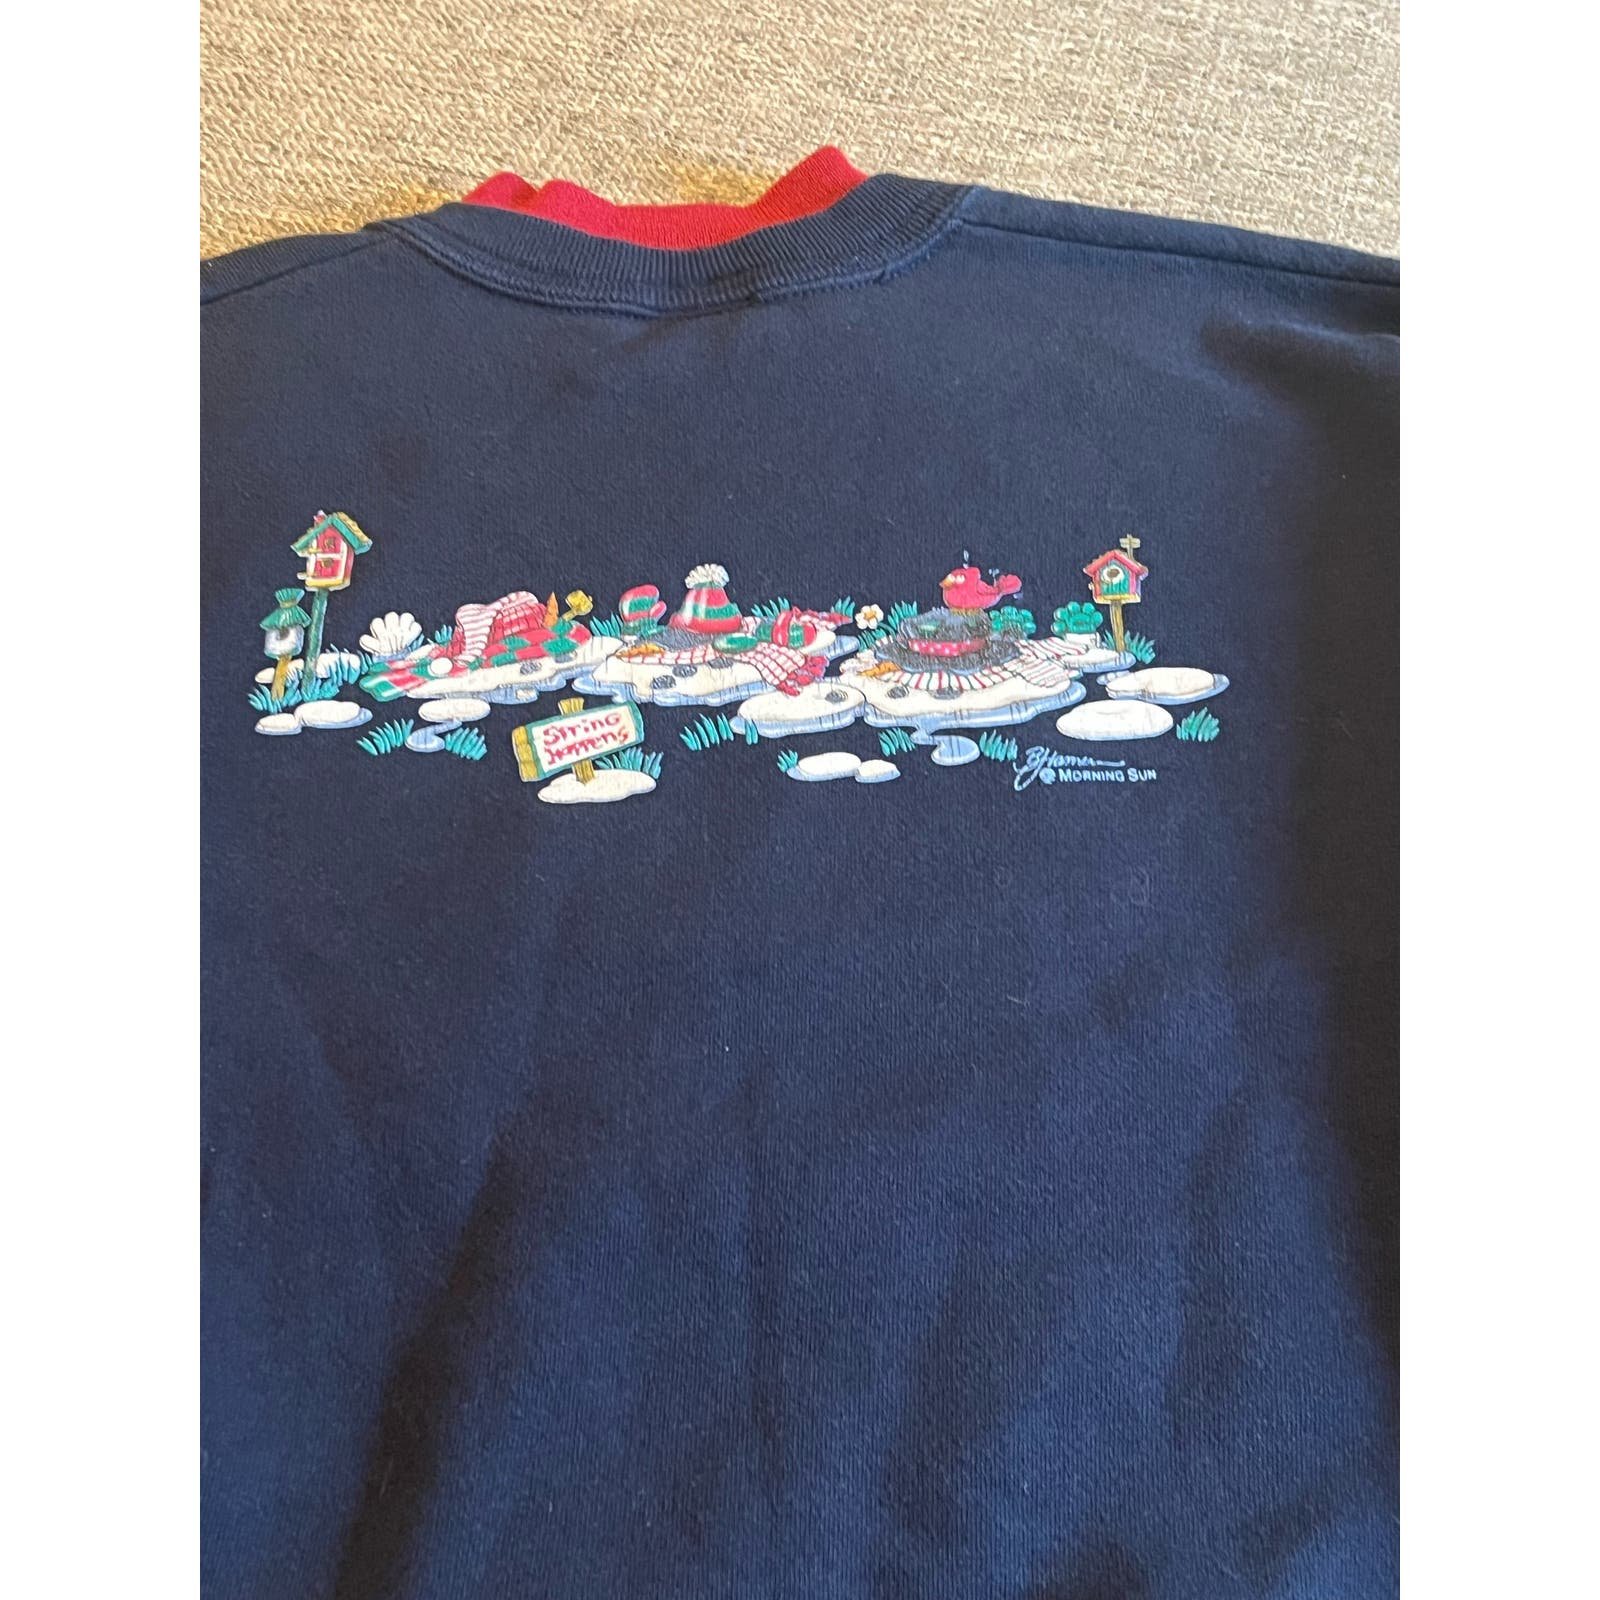 Amazing Vintage 90s Holiday Christmas Sweater - Snowmen Jbwy89Gto hot sale